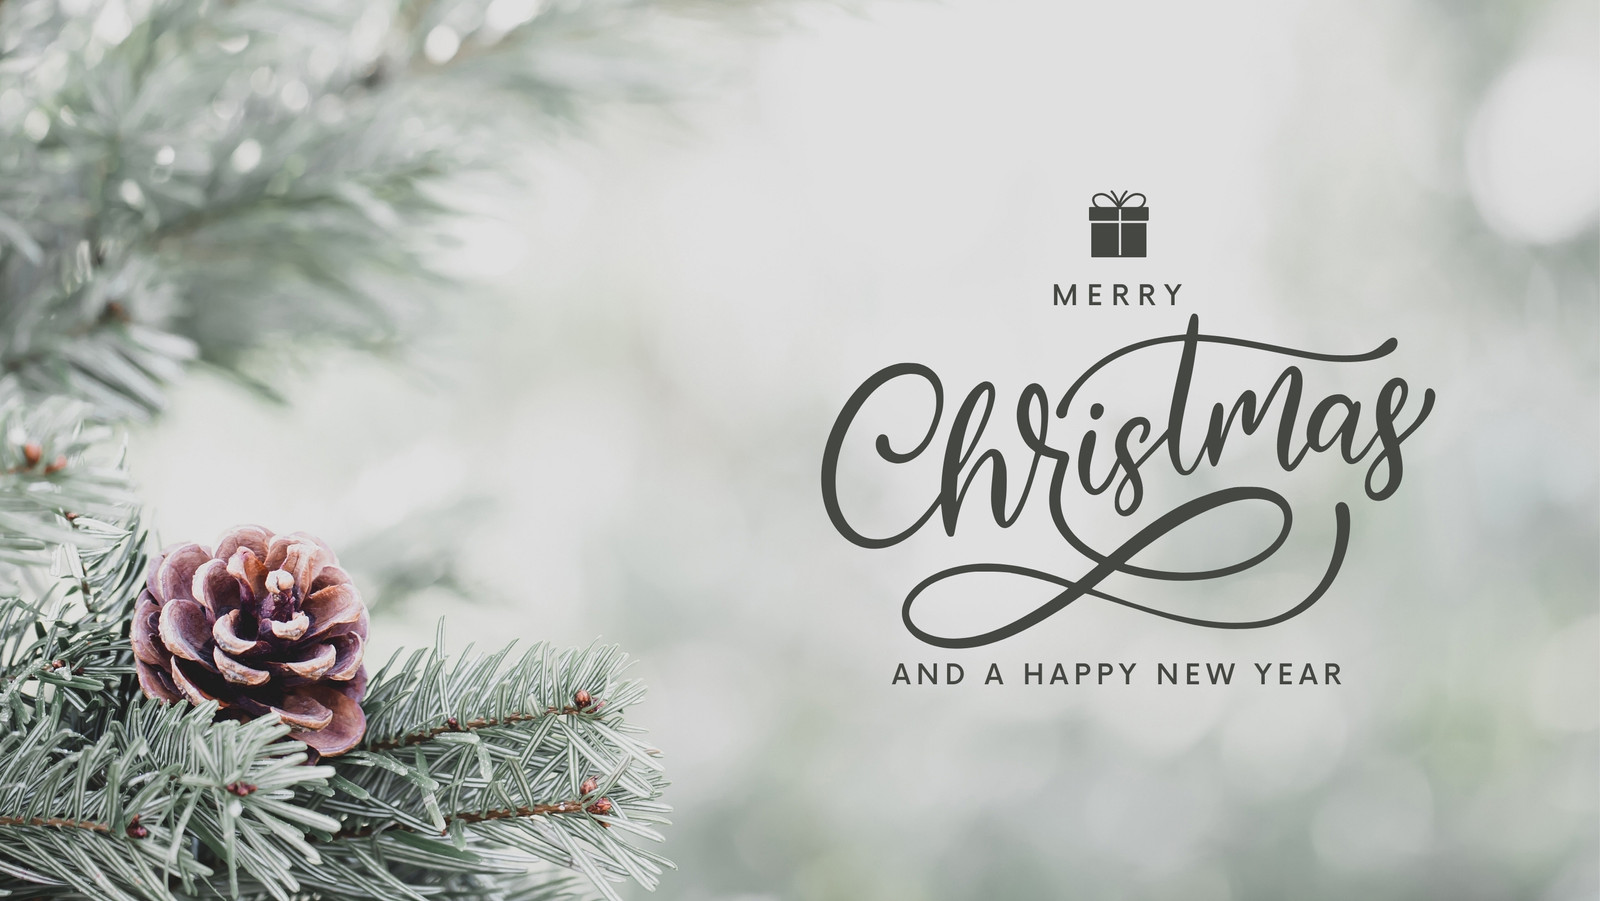 merry christmas and happy new year facebook cover